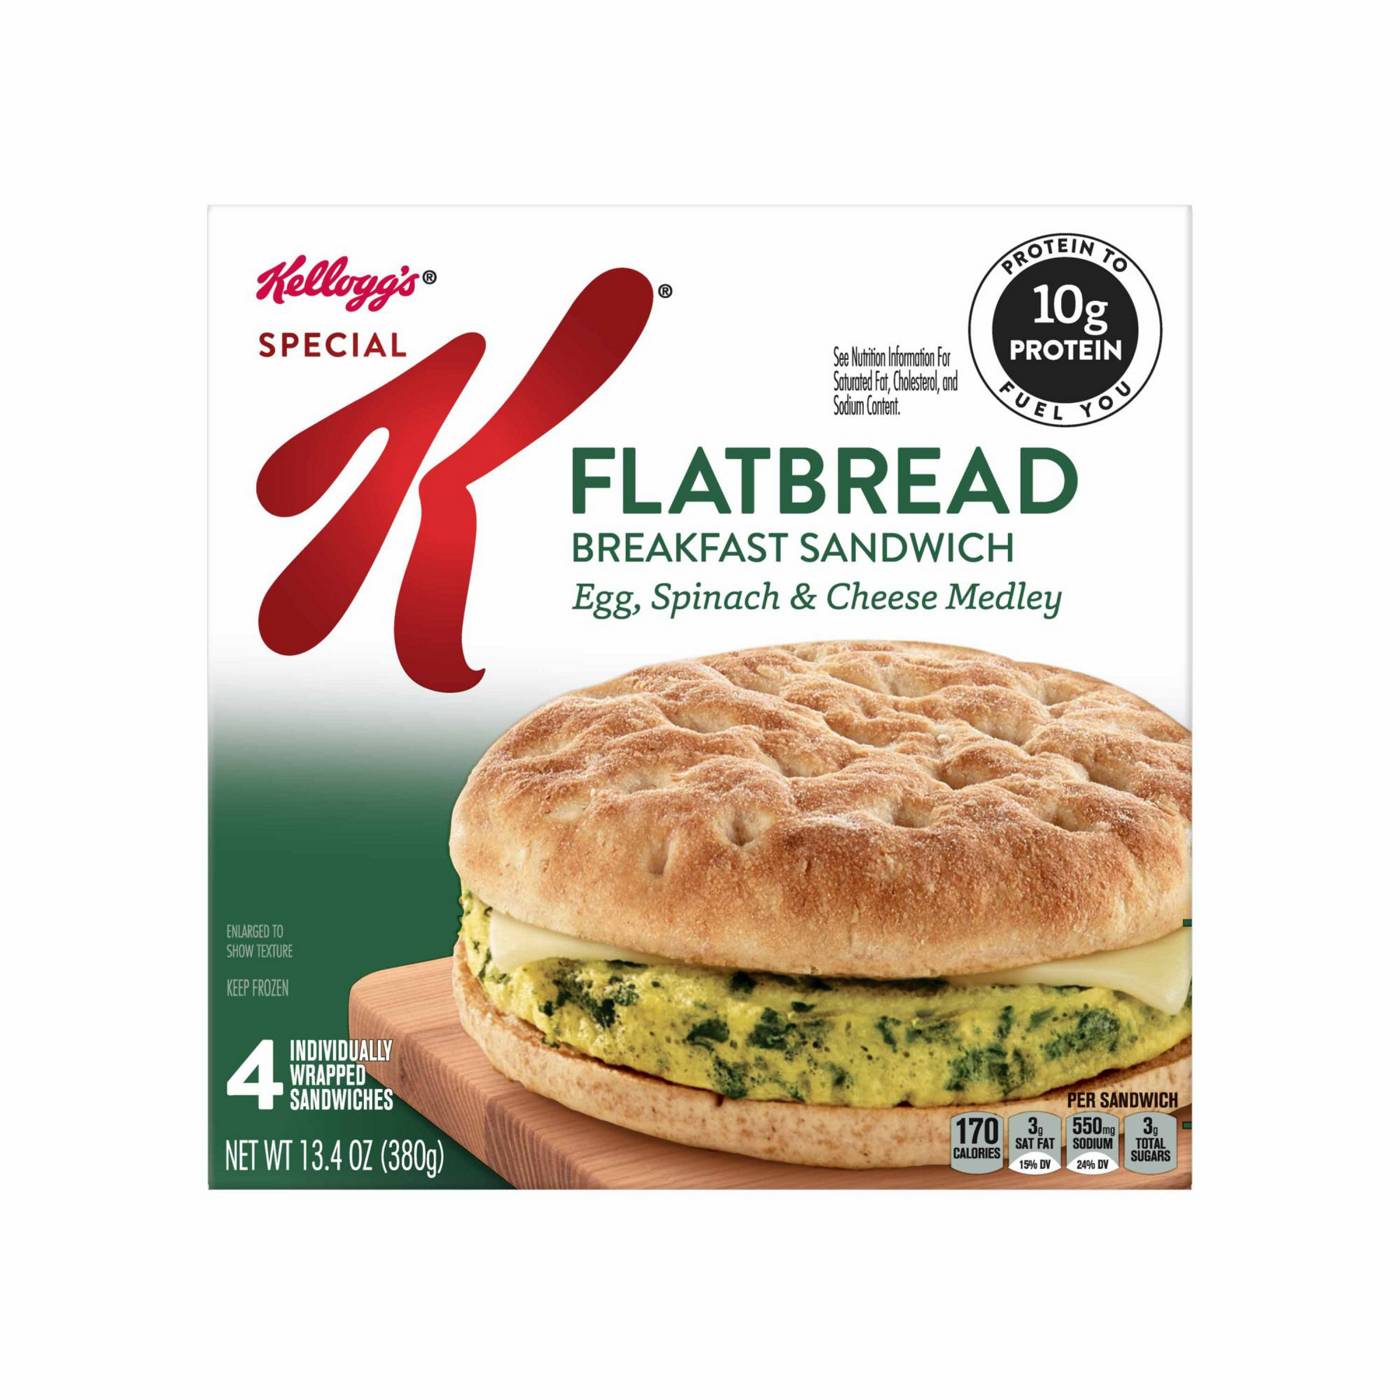 Kellogg's Special K Flatbread Breakfast Sandwiches Egg, Spinach, and Cheese Medley; image 6 of 6